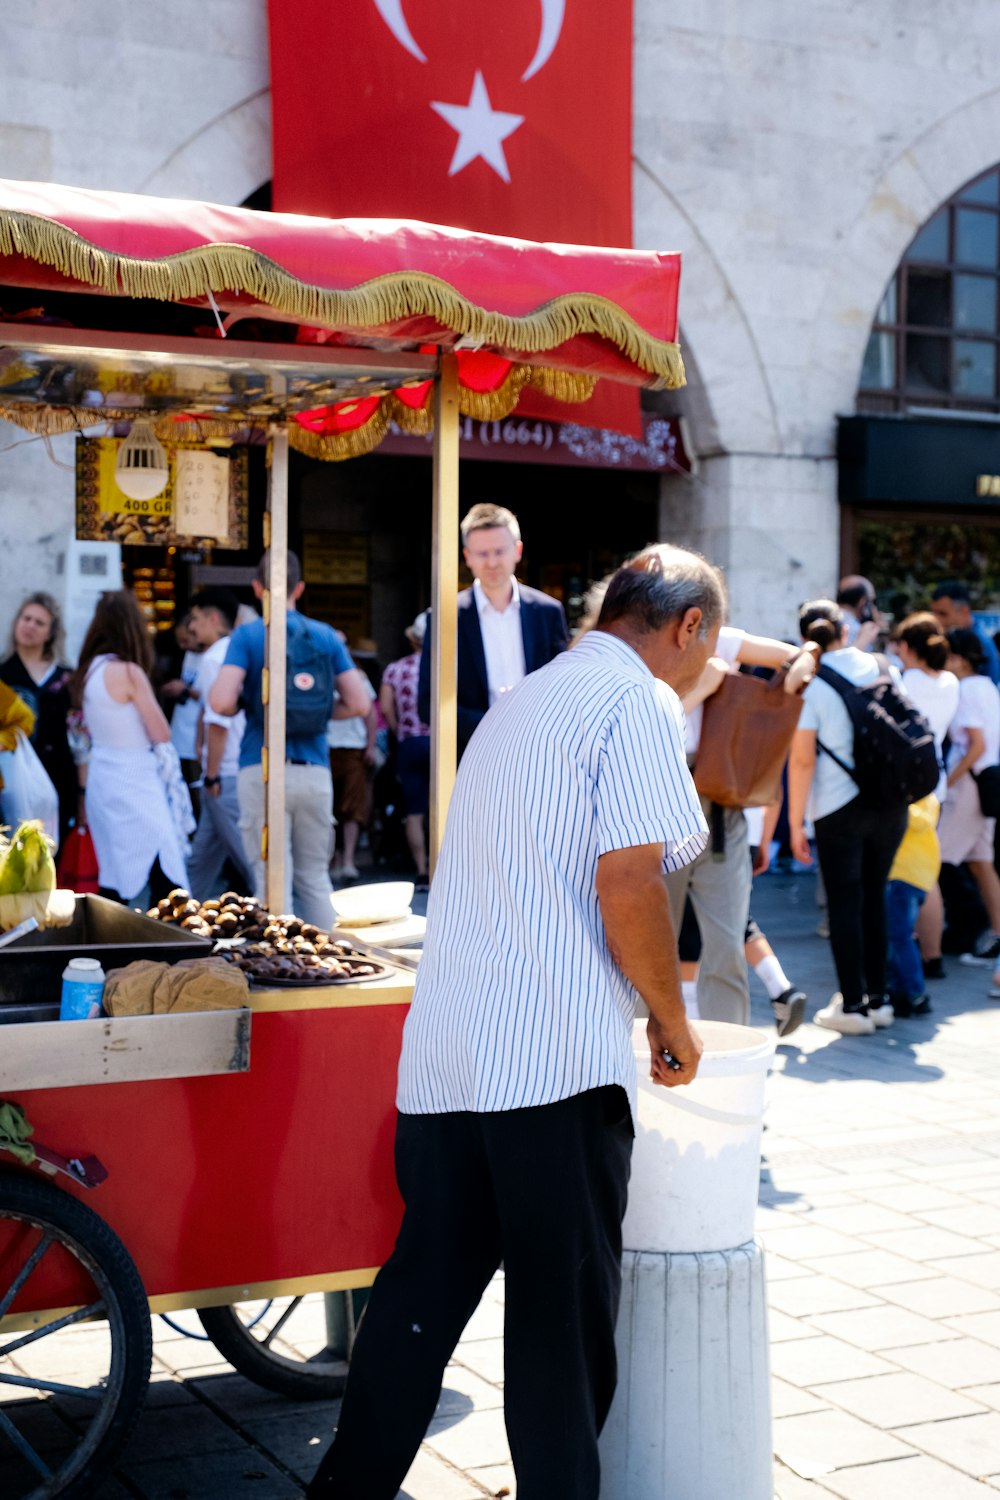 a man standing next to a food stand